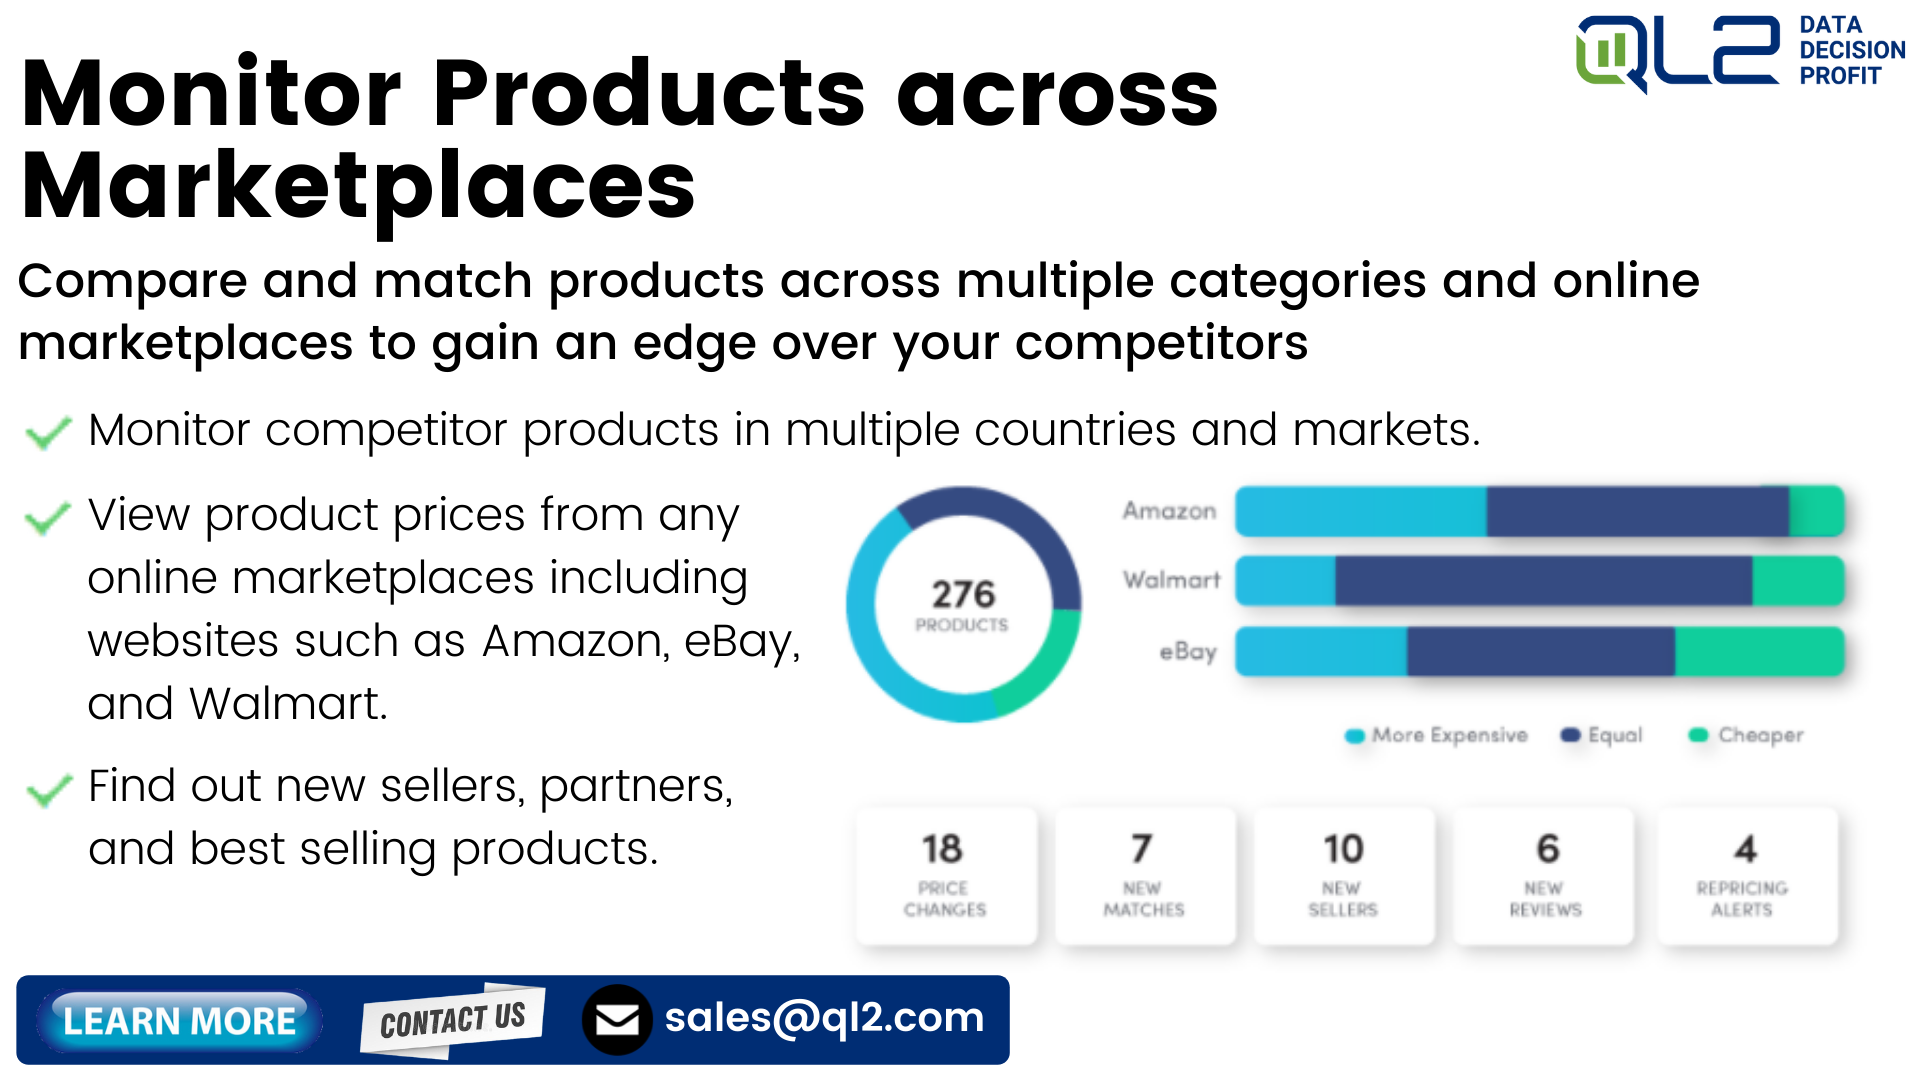 Compare and match products across multiple categories and online marketplaces to gain an edge over your competitors. Monitor competitor products in multiple countries and markets; view product prices from any online marketplaces including websites such as Amazon, eBay, and Walmart; and find our new sellers, partners, and best selling products.